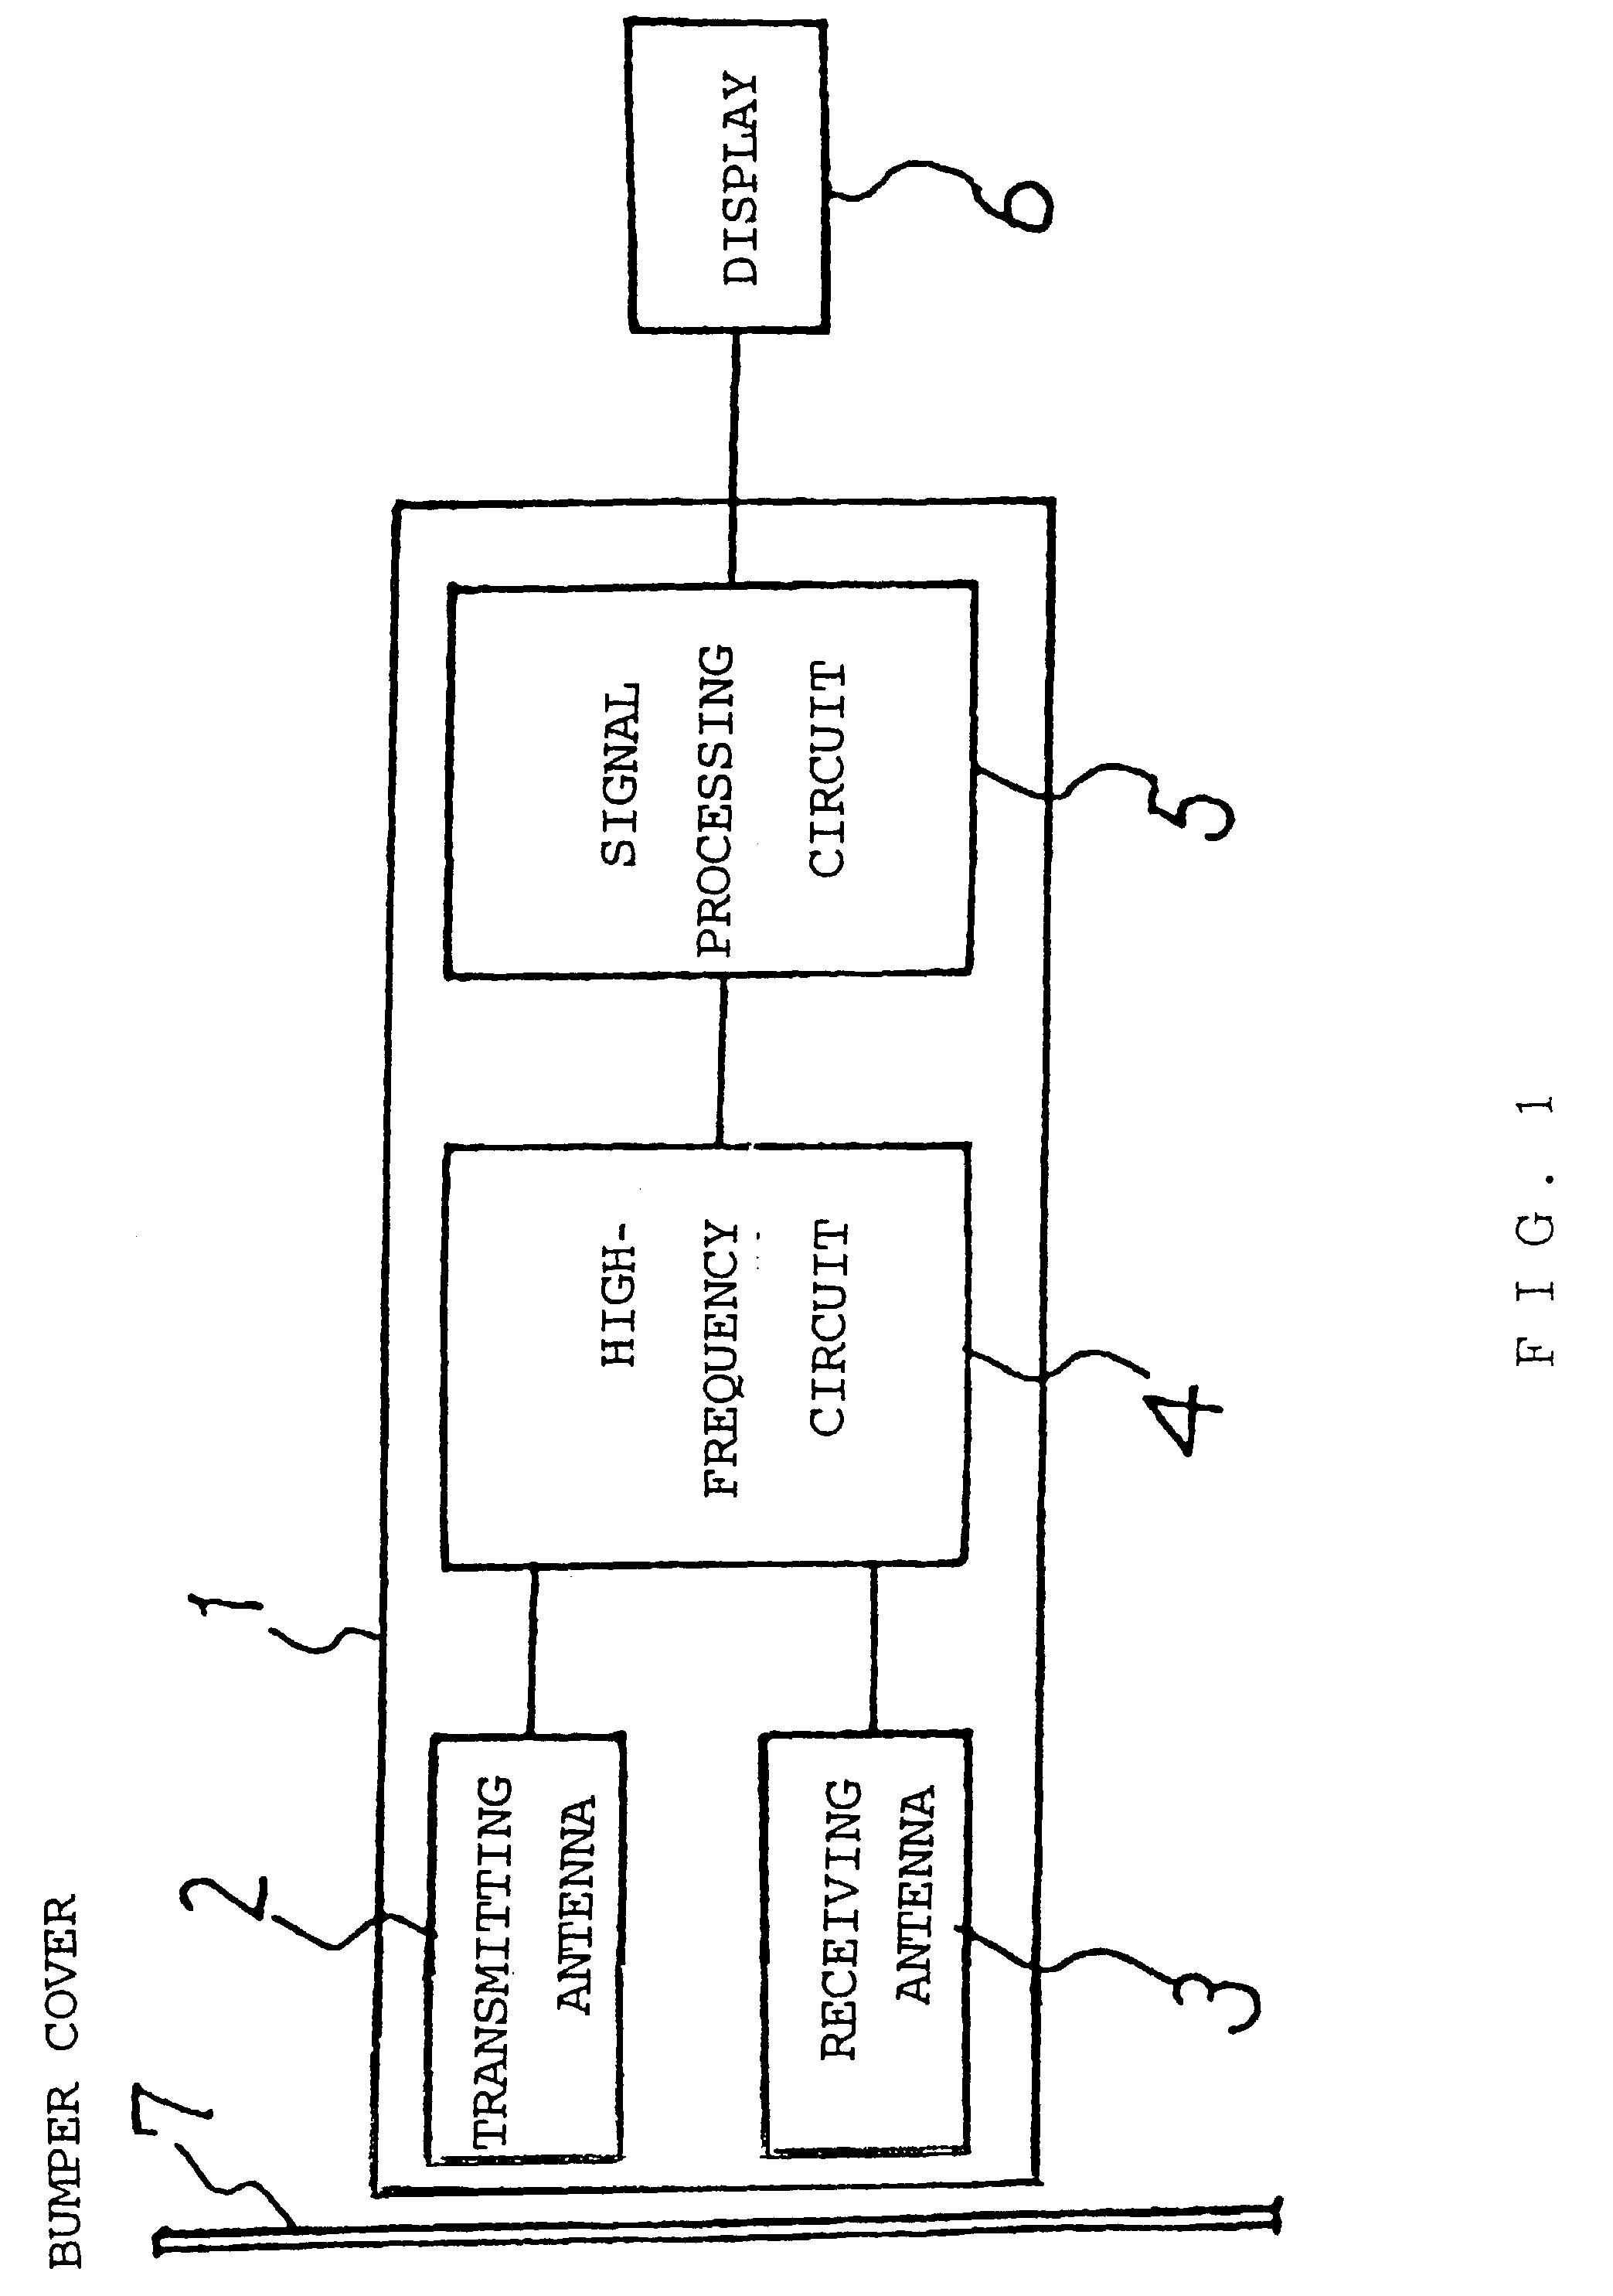 Peripheral monitor for monitoring periphery of vehicle